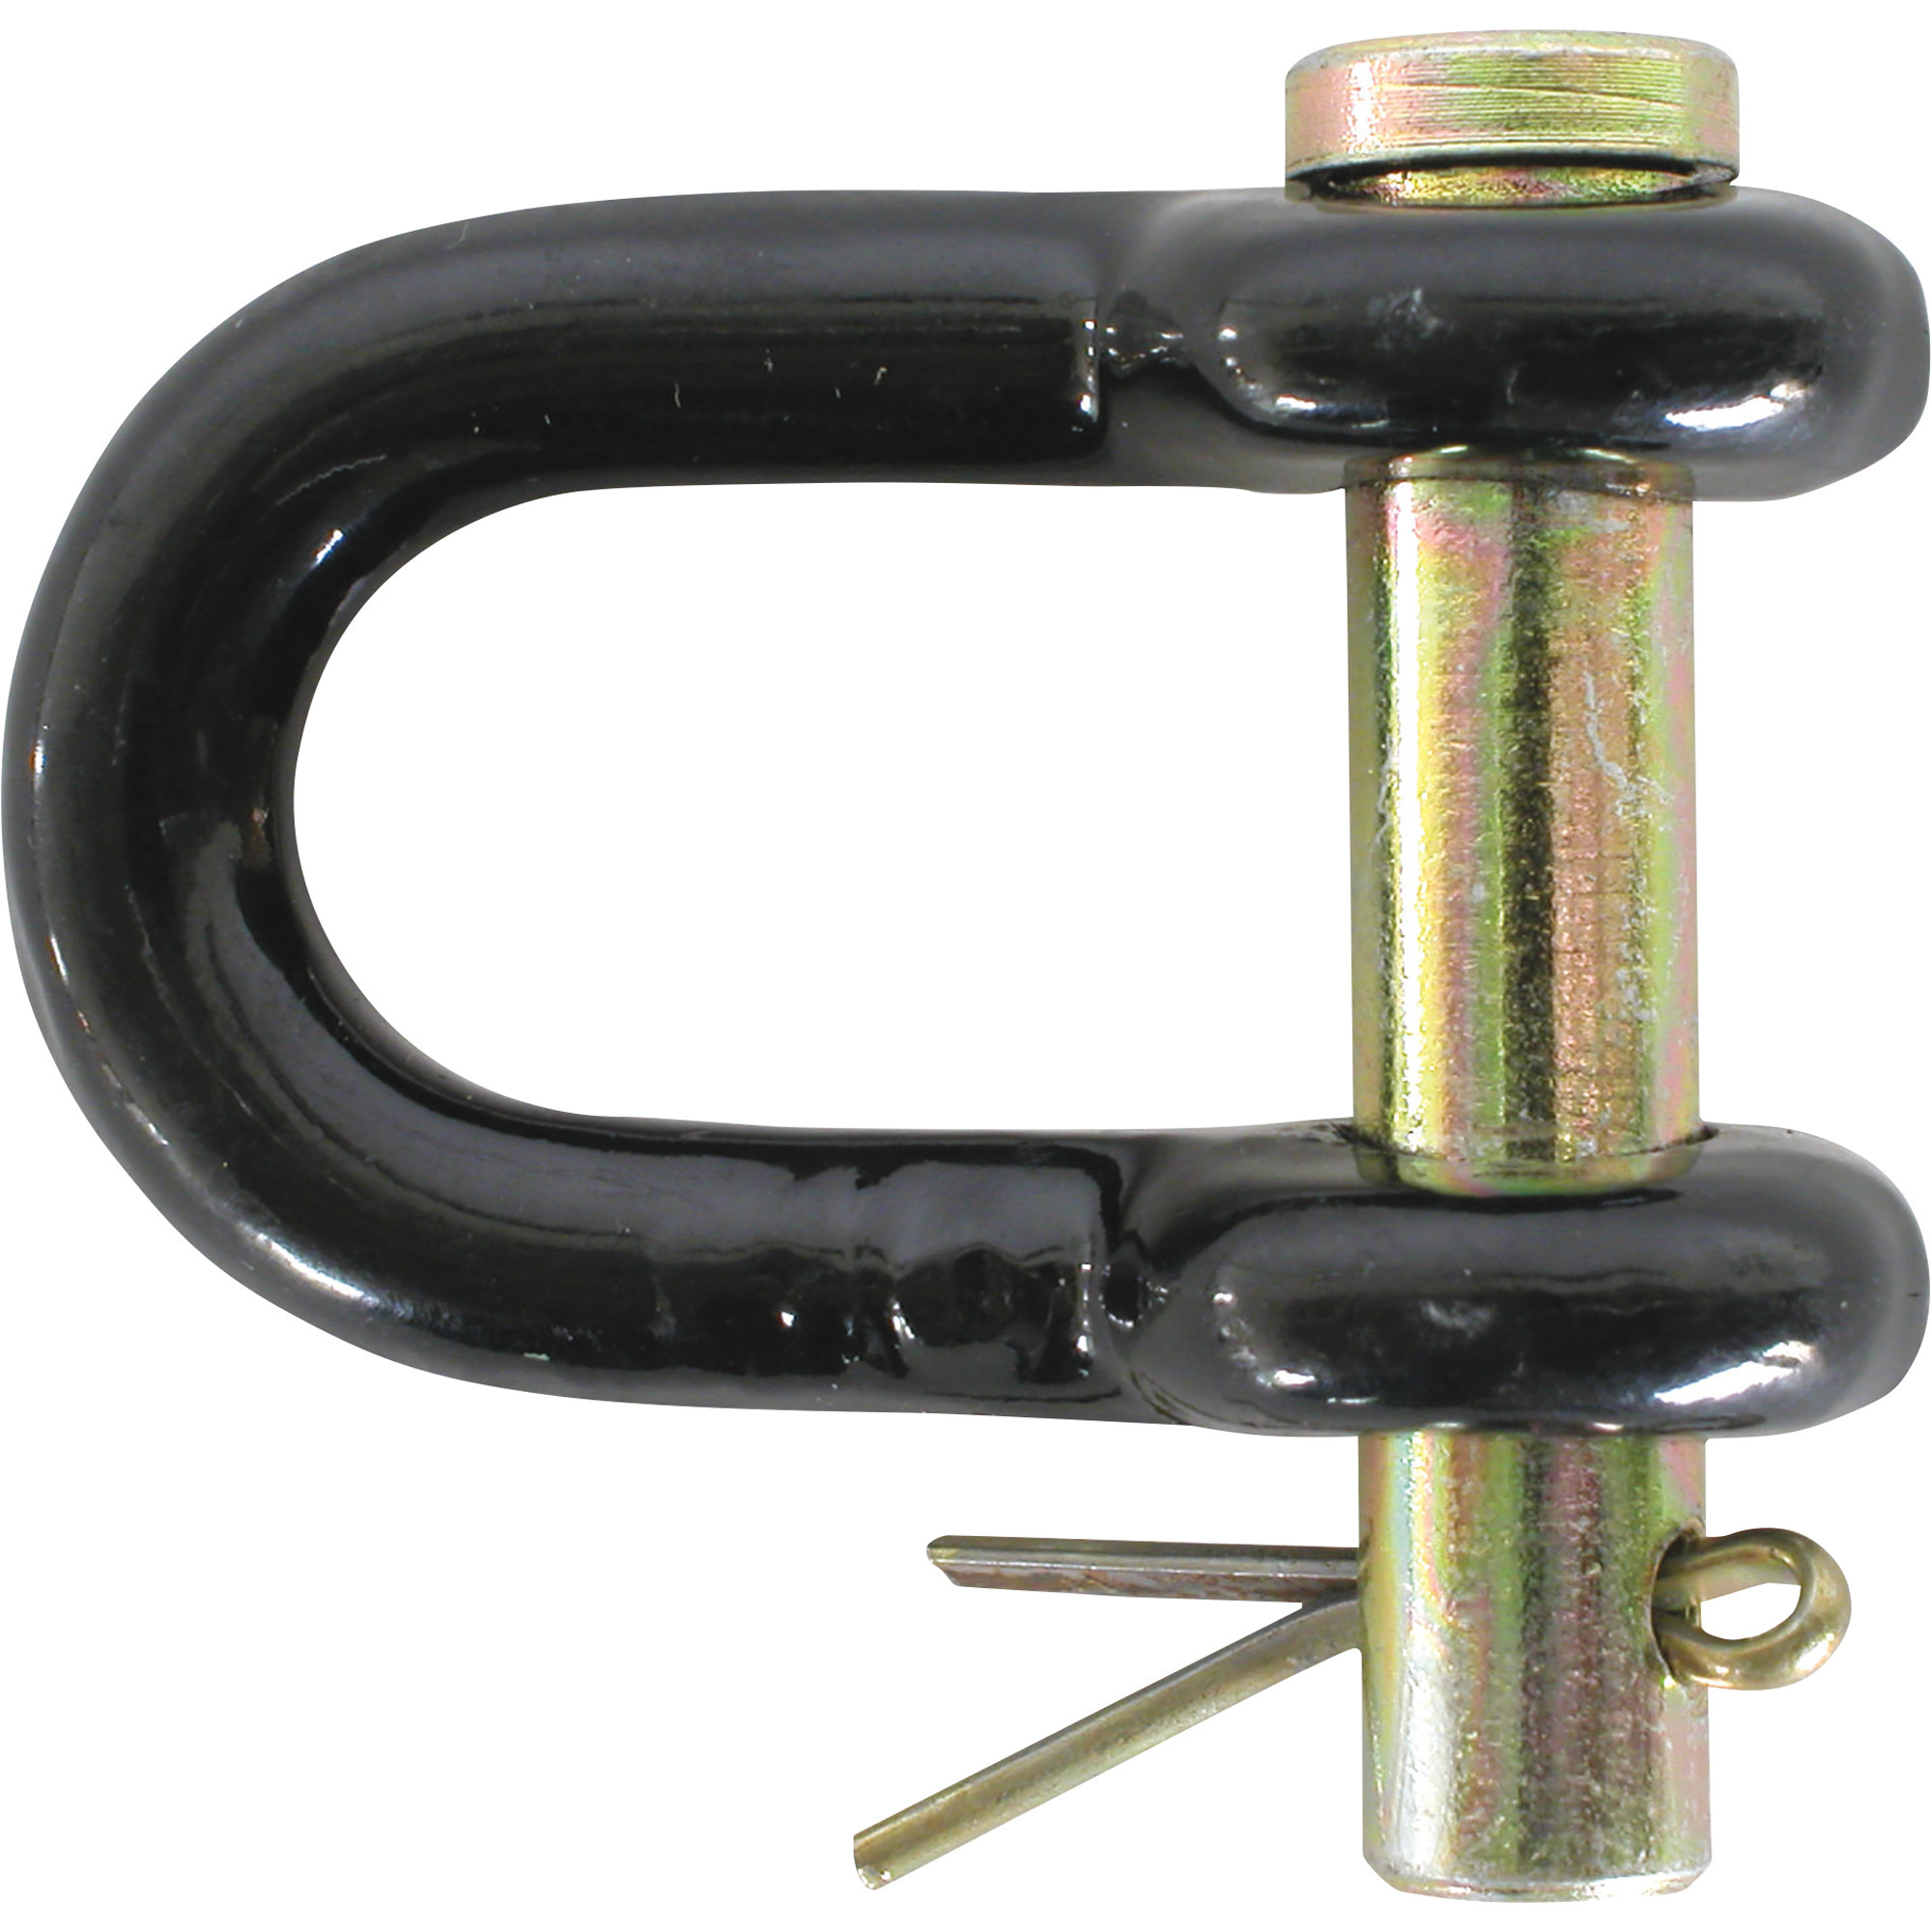 Braber Equipment Straight Clevis, 1/2Inch x 1 1/16Inch, Model 64.401.050